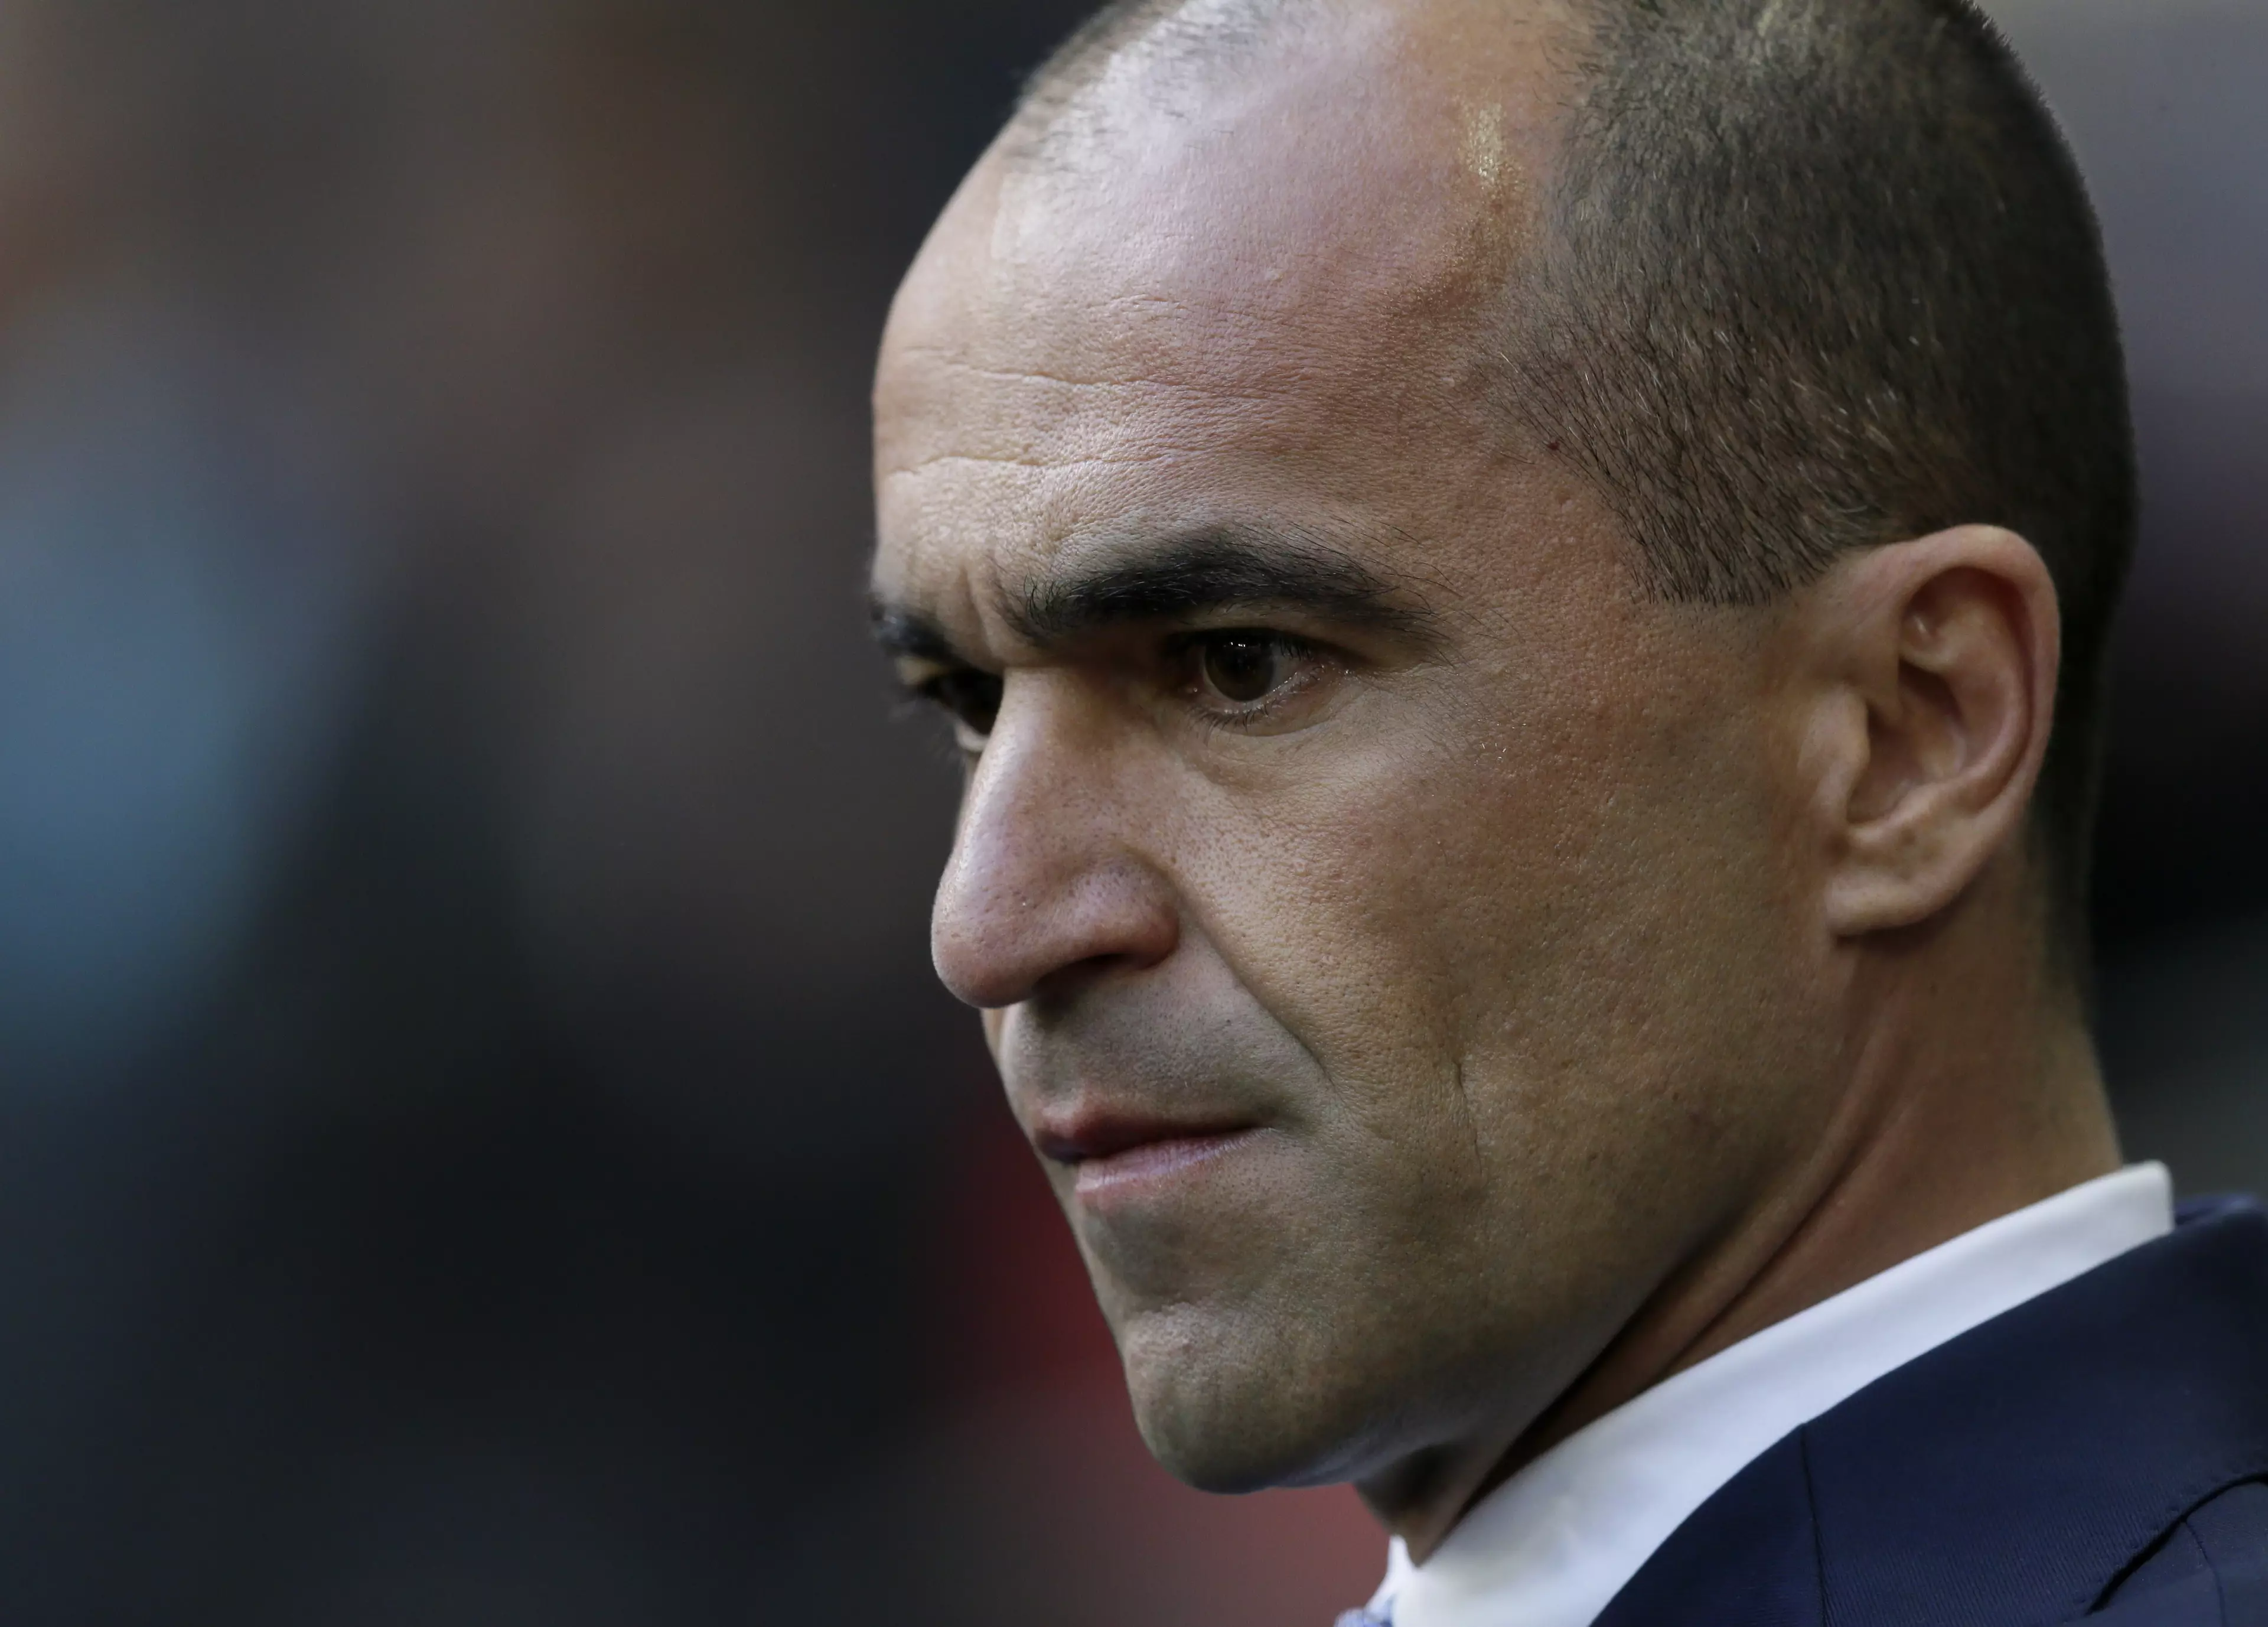 Rumours Are Flying That Everton Have Decided To Sack Roberto Martinez